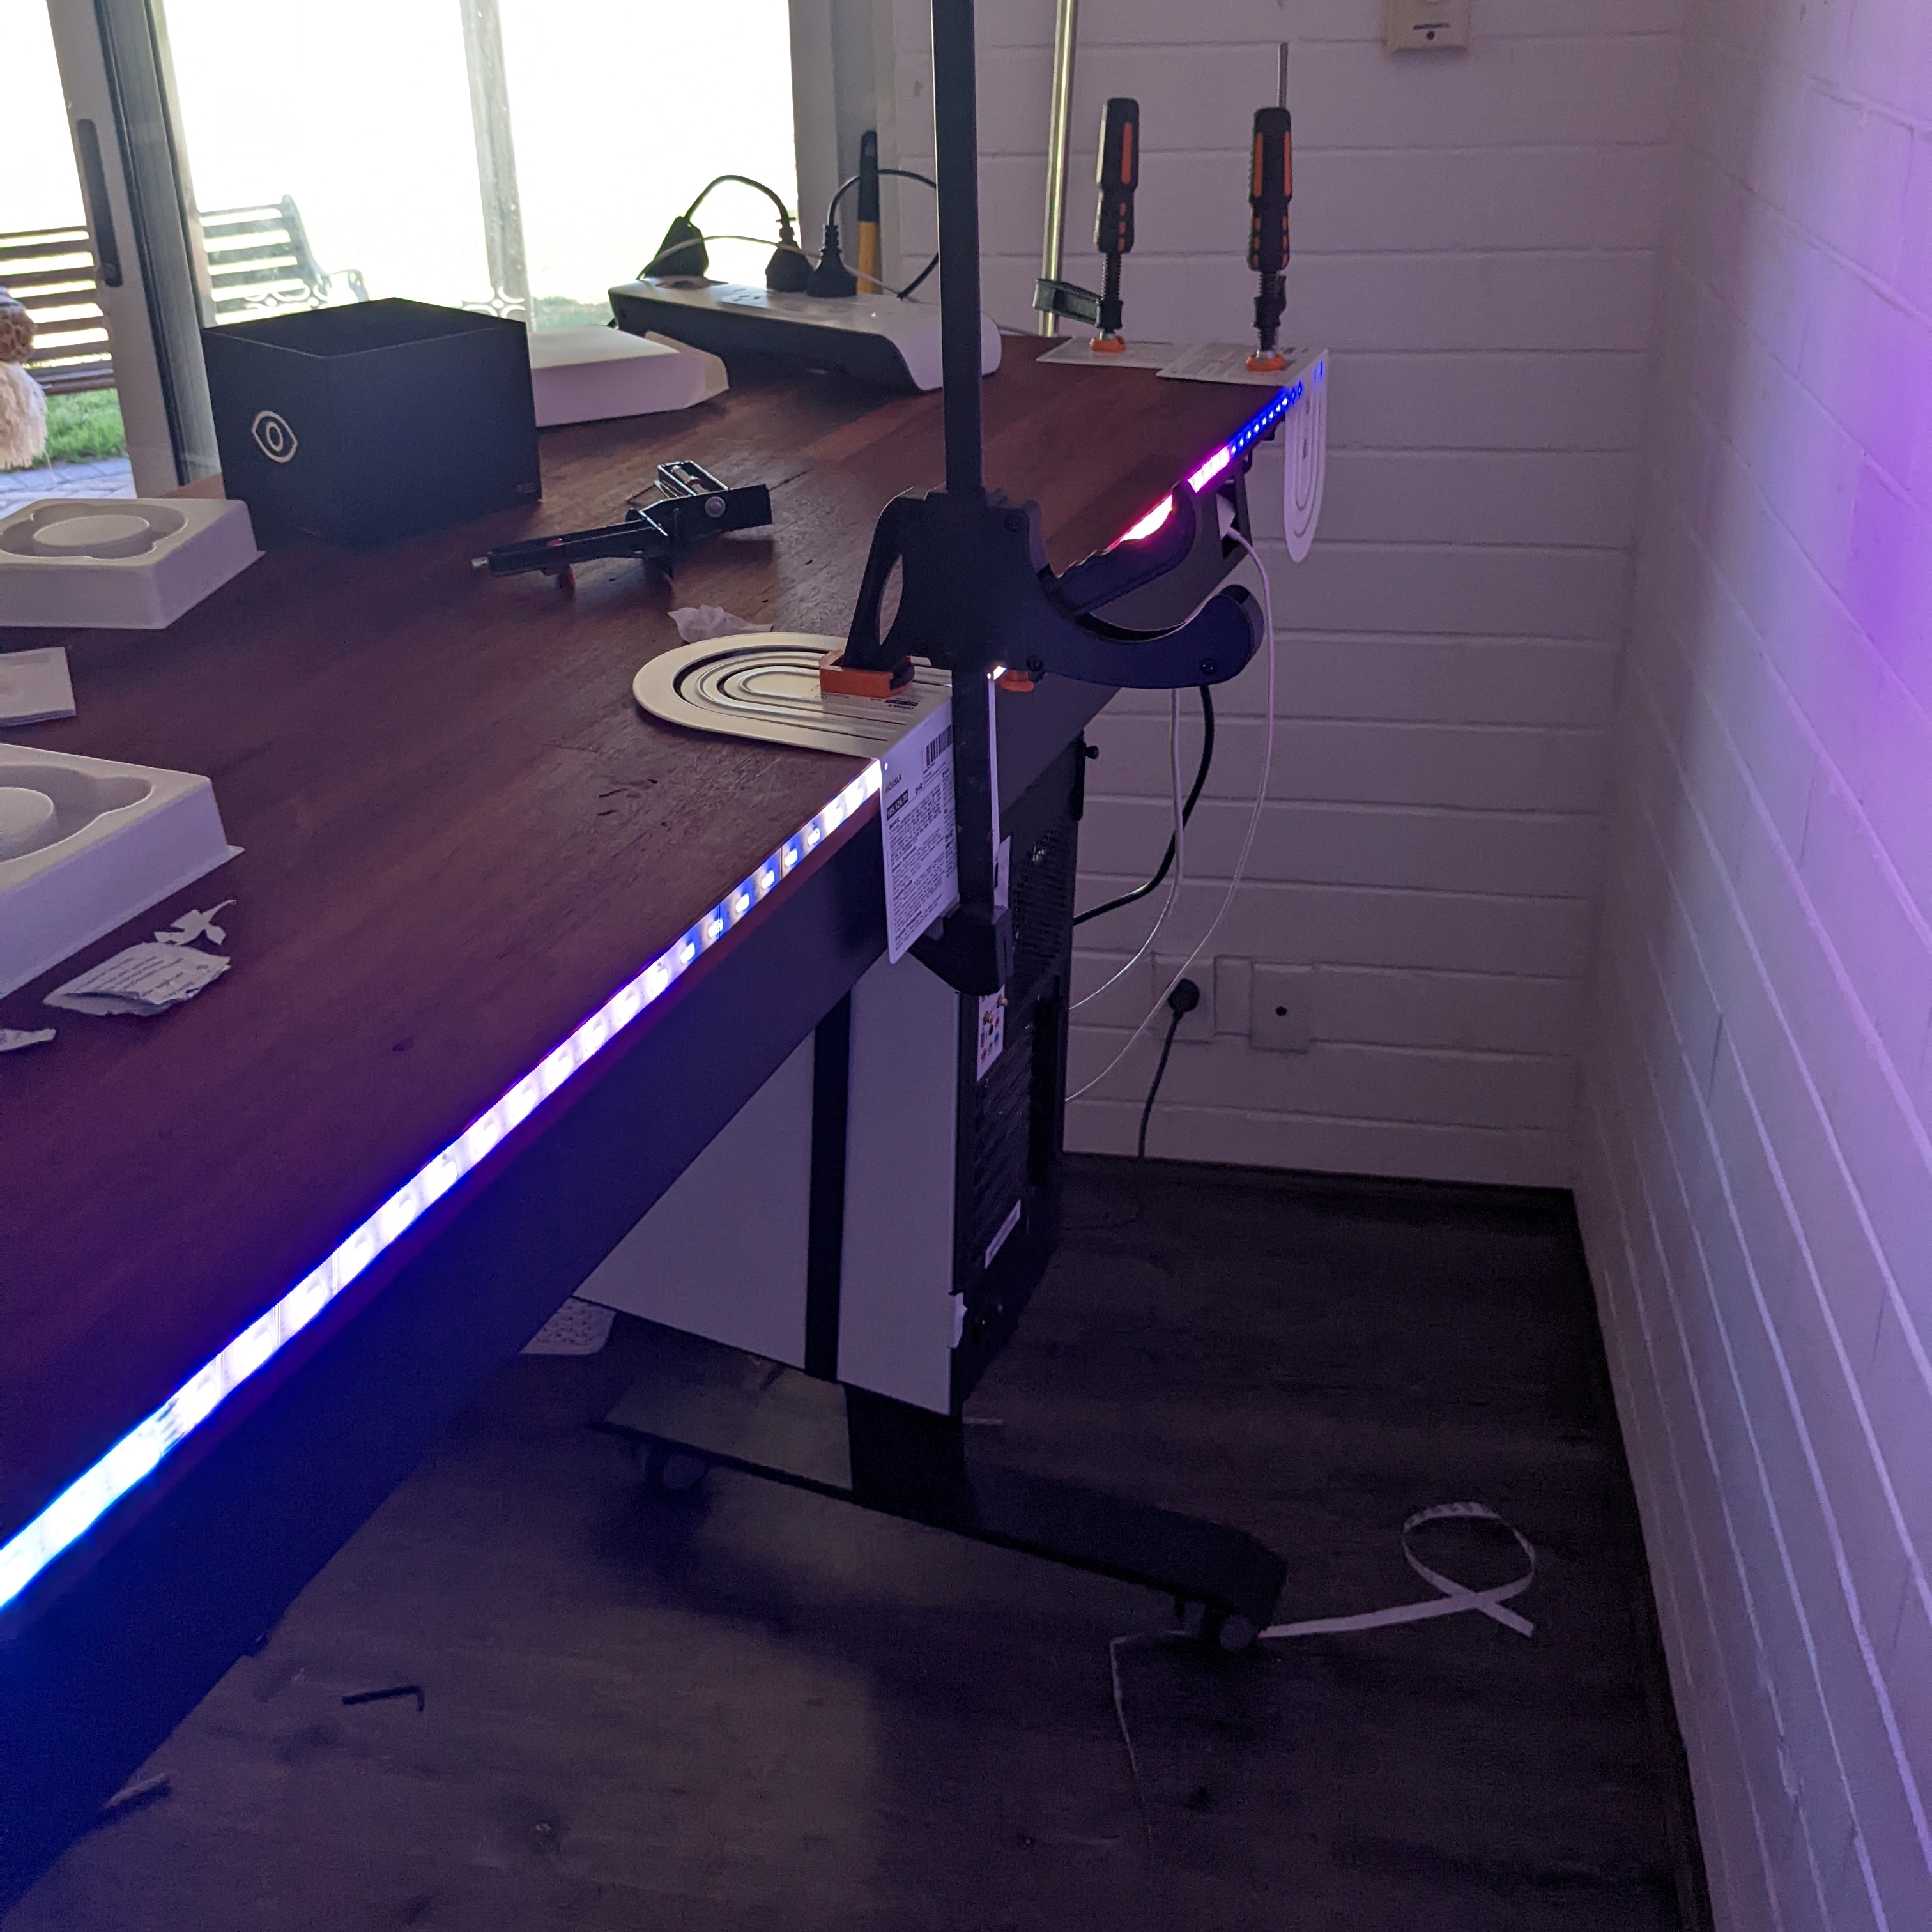 LED light strip attached to the back of the desk top, with a bookend being used to hold it to the back of the desk and a clamp being used to hold the bookend in place, in the background there are several other clamps doing the same thing